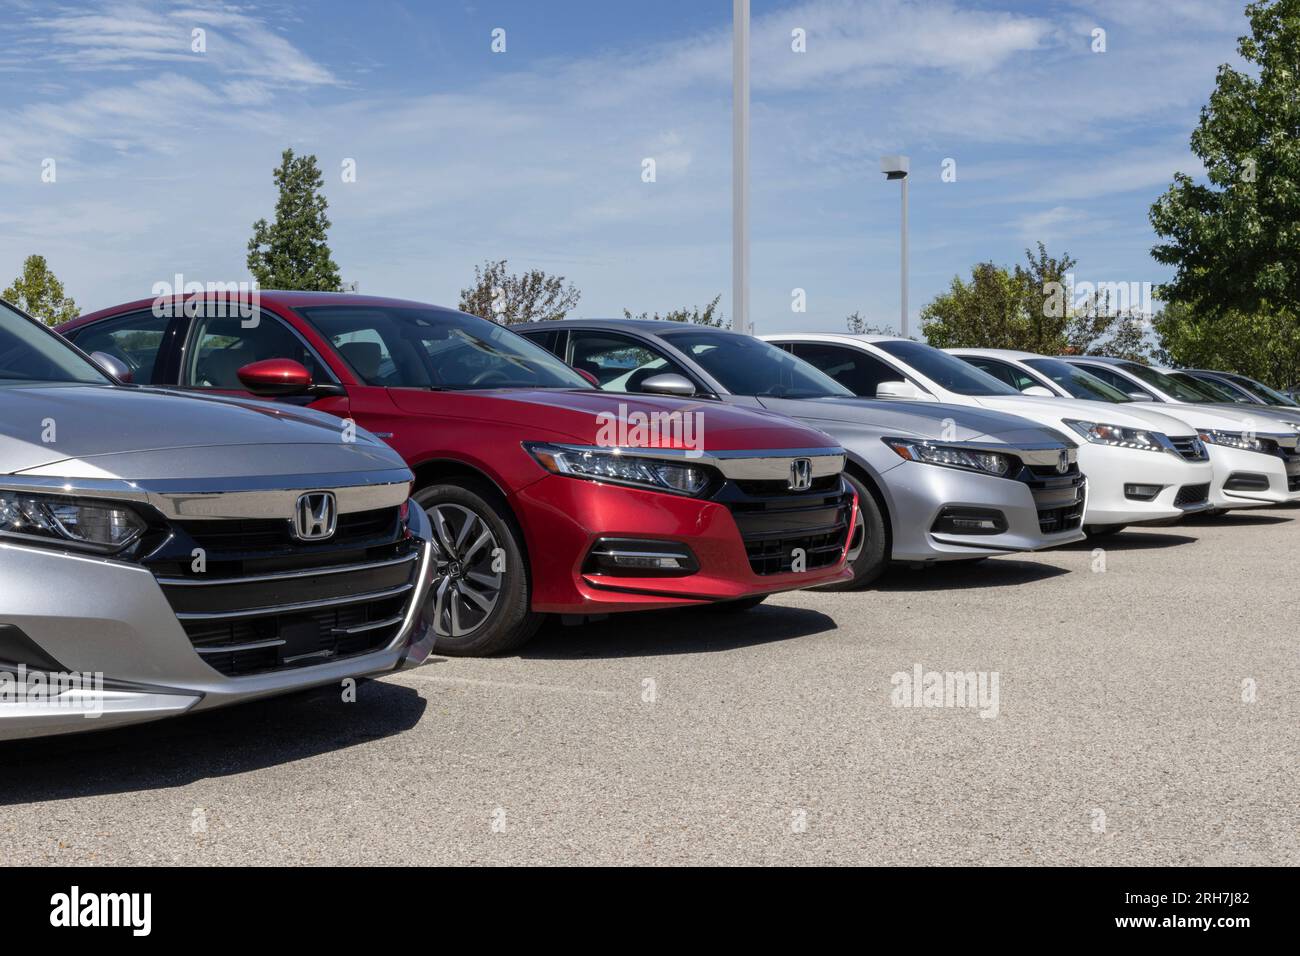 Fishers - August 13, 2023: Honda Accord display at a dealership. Honda offers the Accord in EX and LX or Hybrid models. Stock Photo